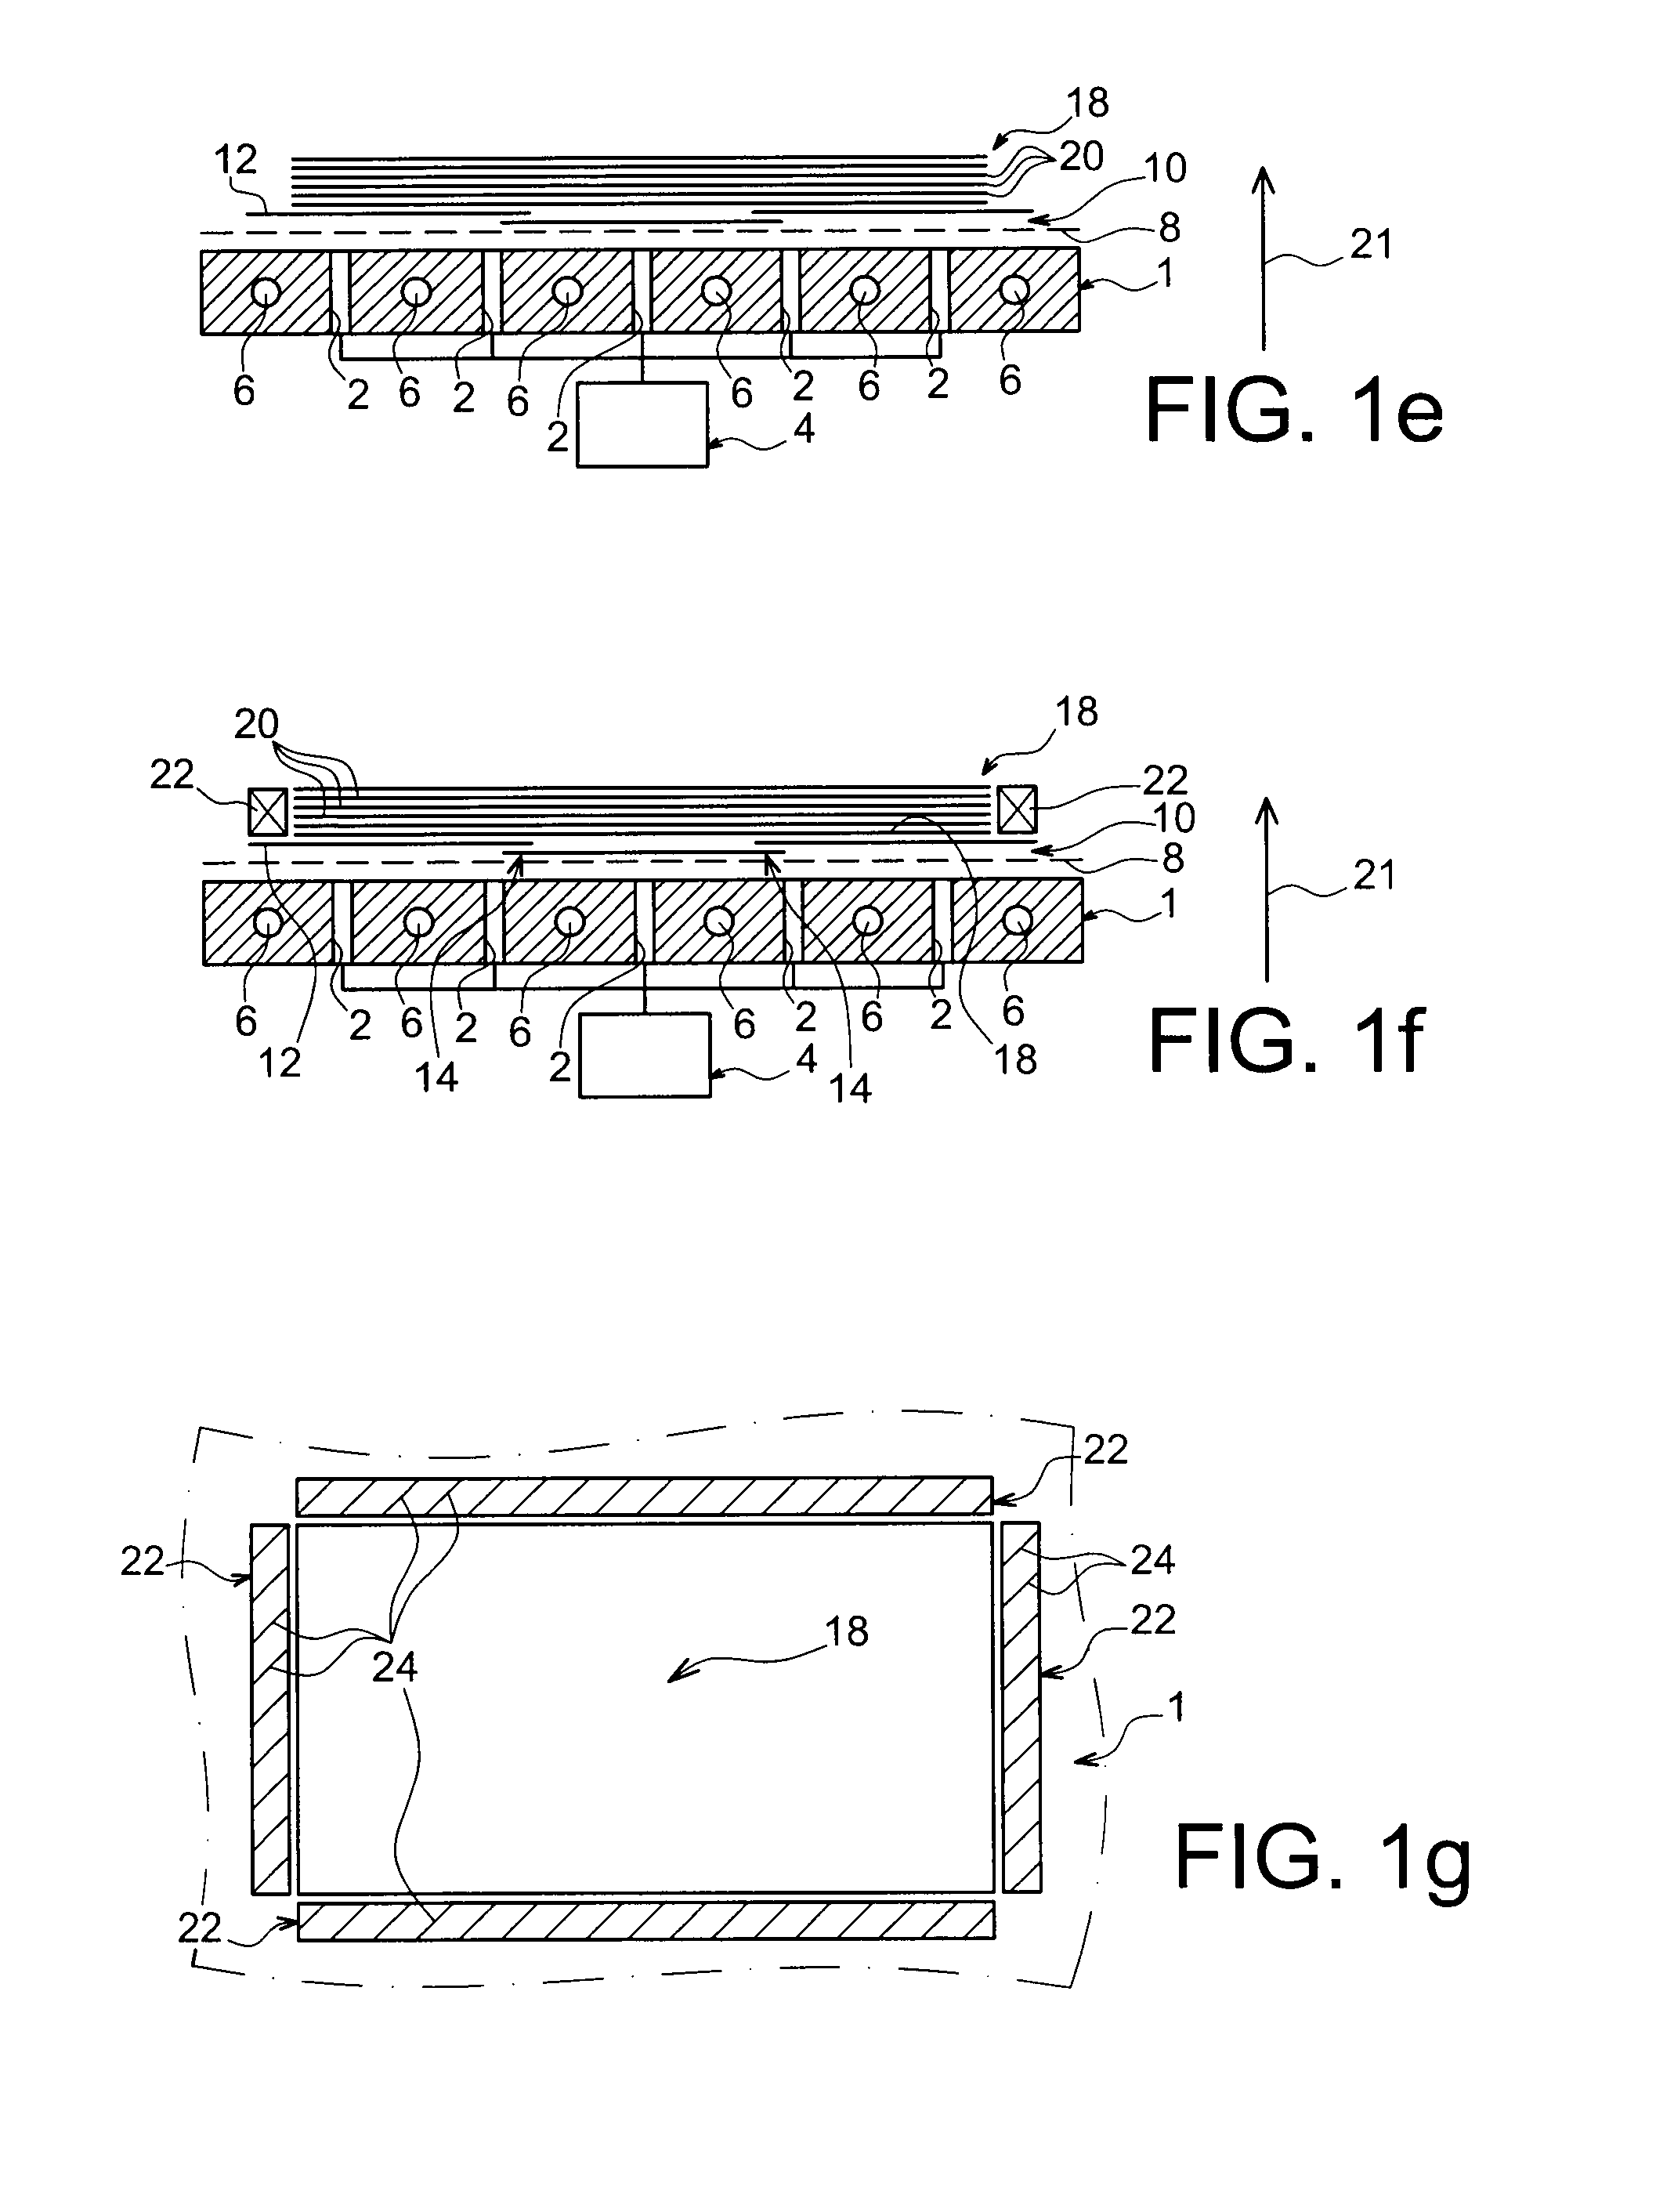 Process for manufacturing a panel made of a thermoplastic composite